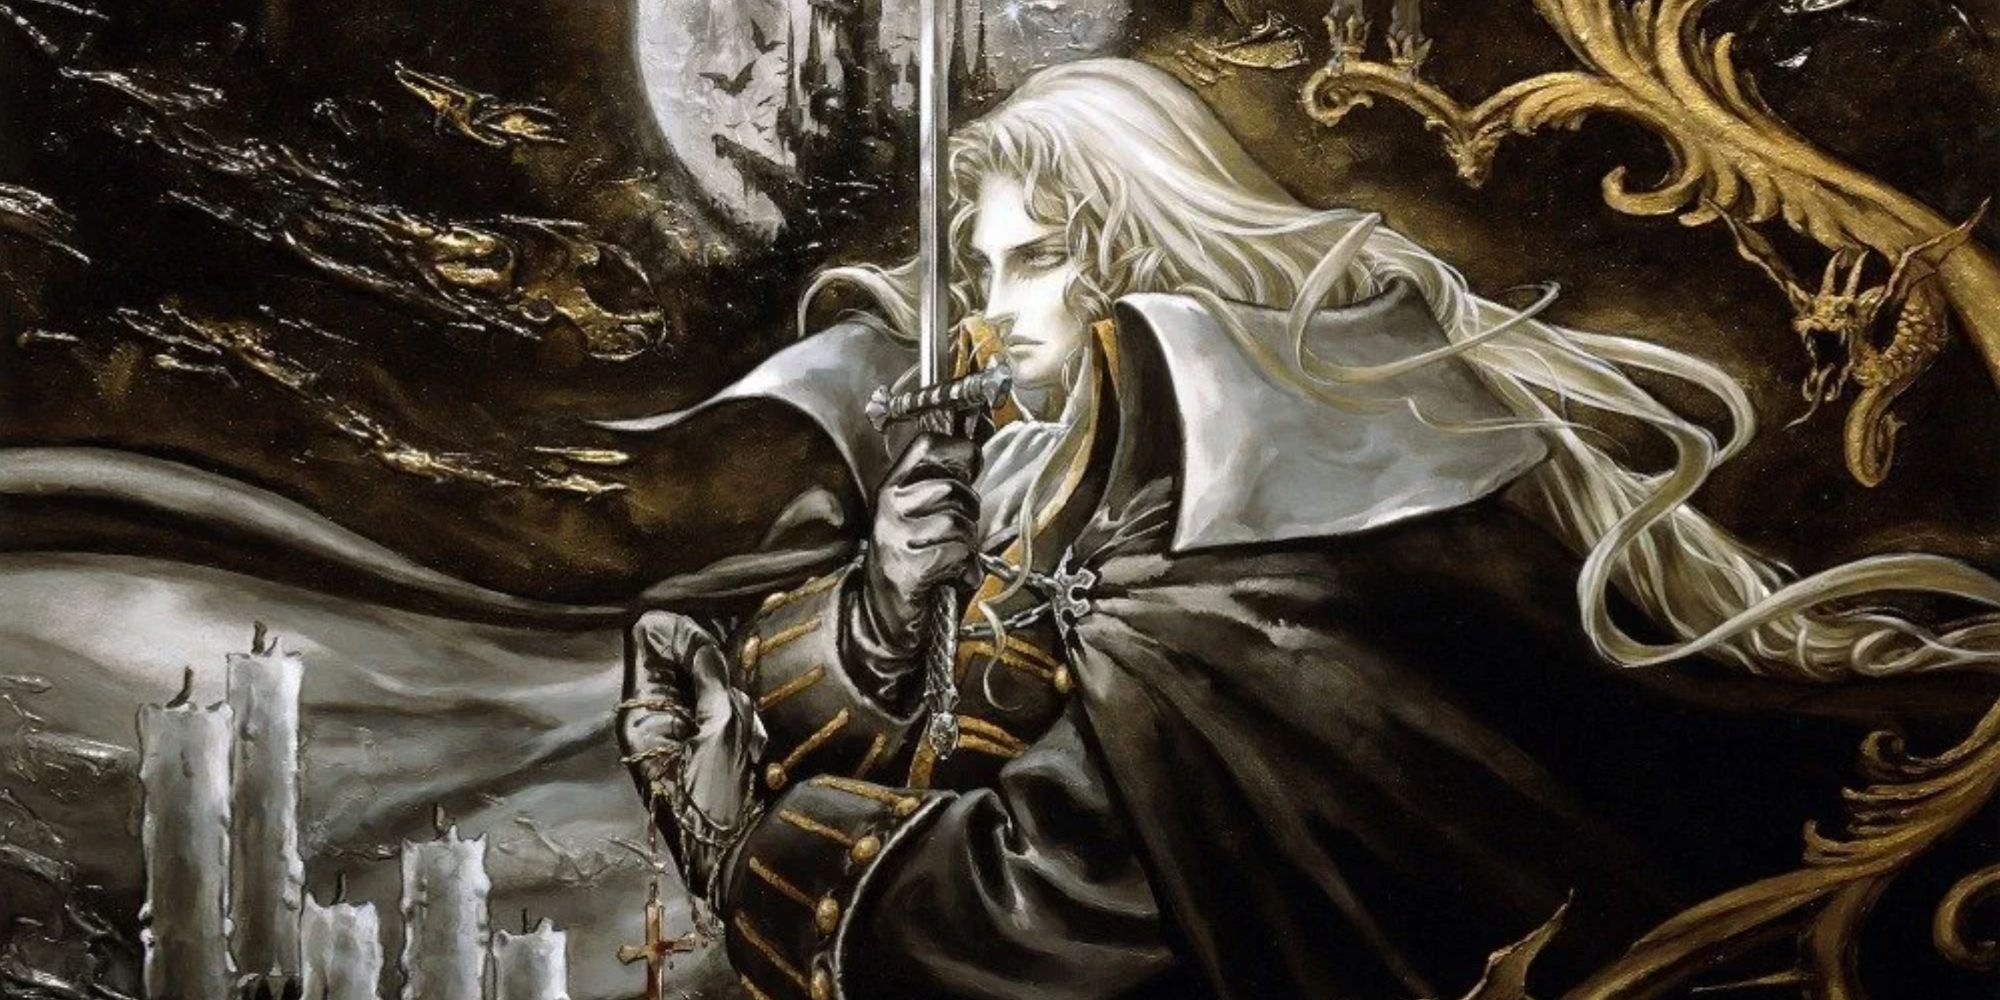 The Box Art for Castlevania: Symphony of the Night